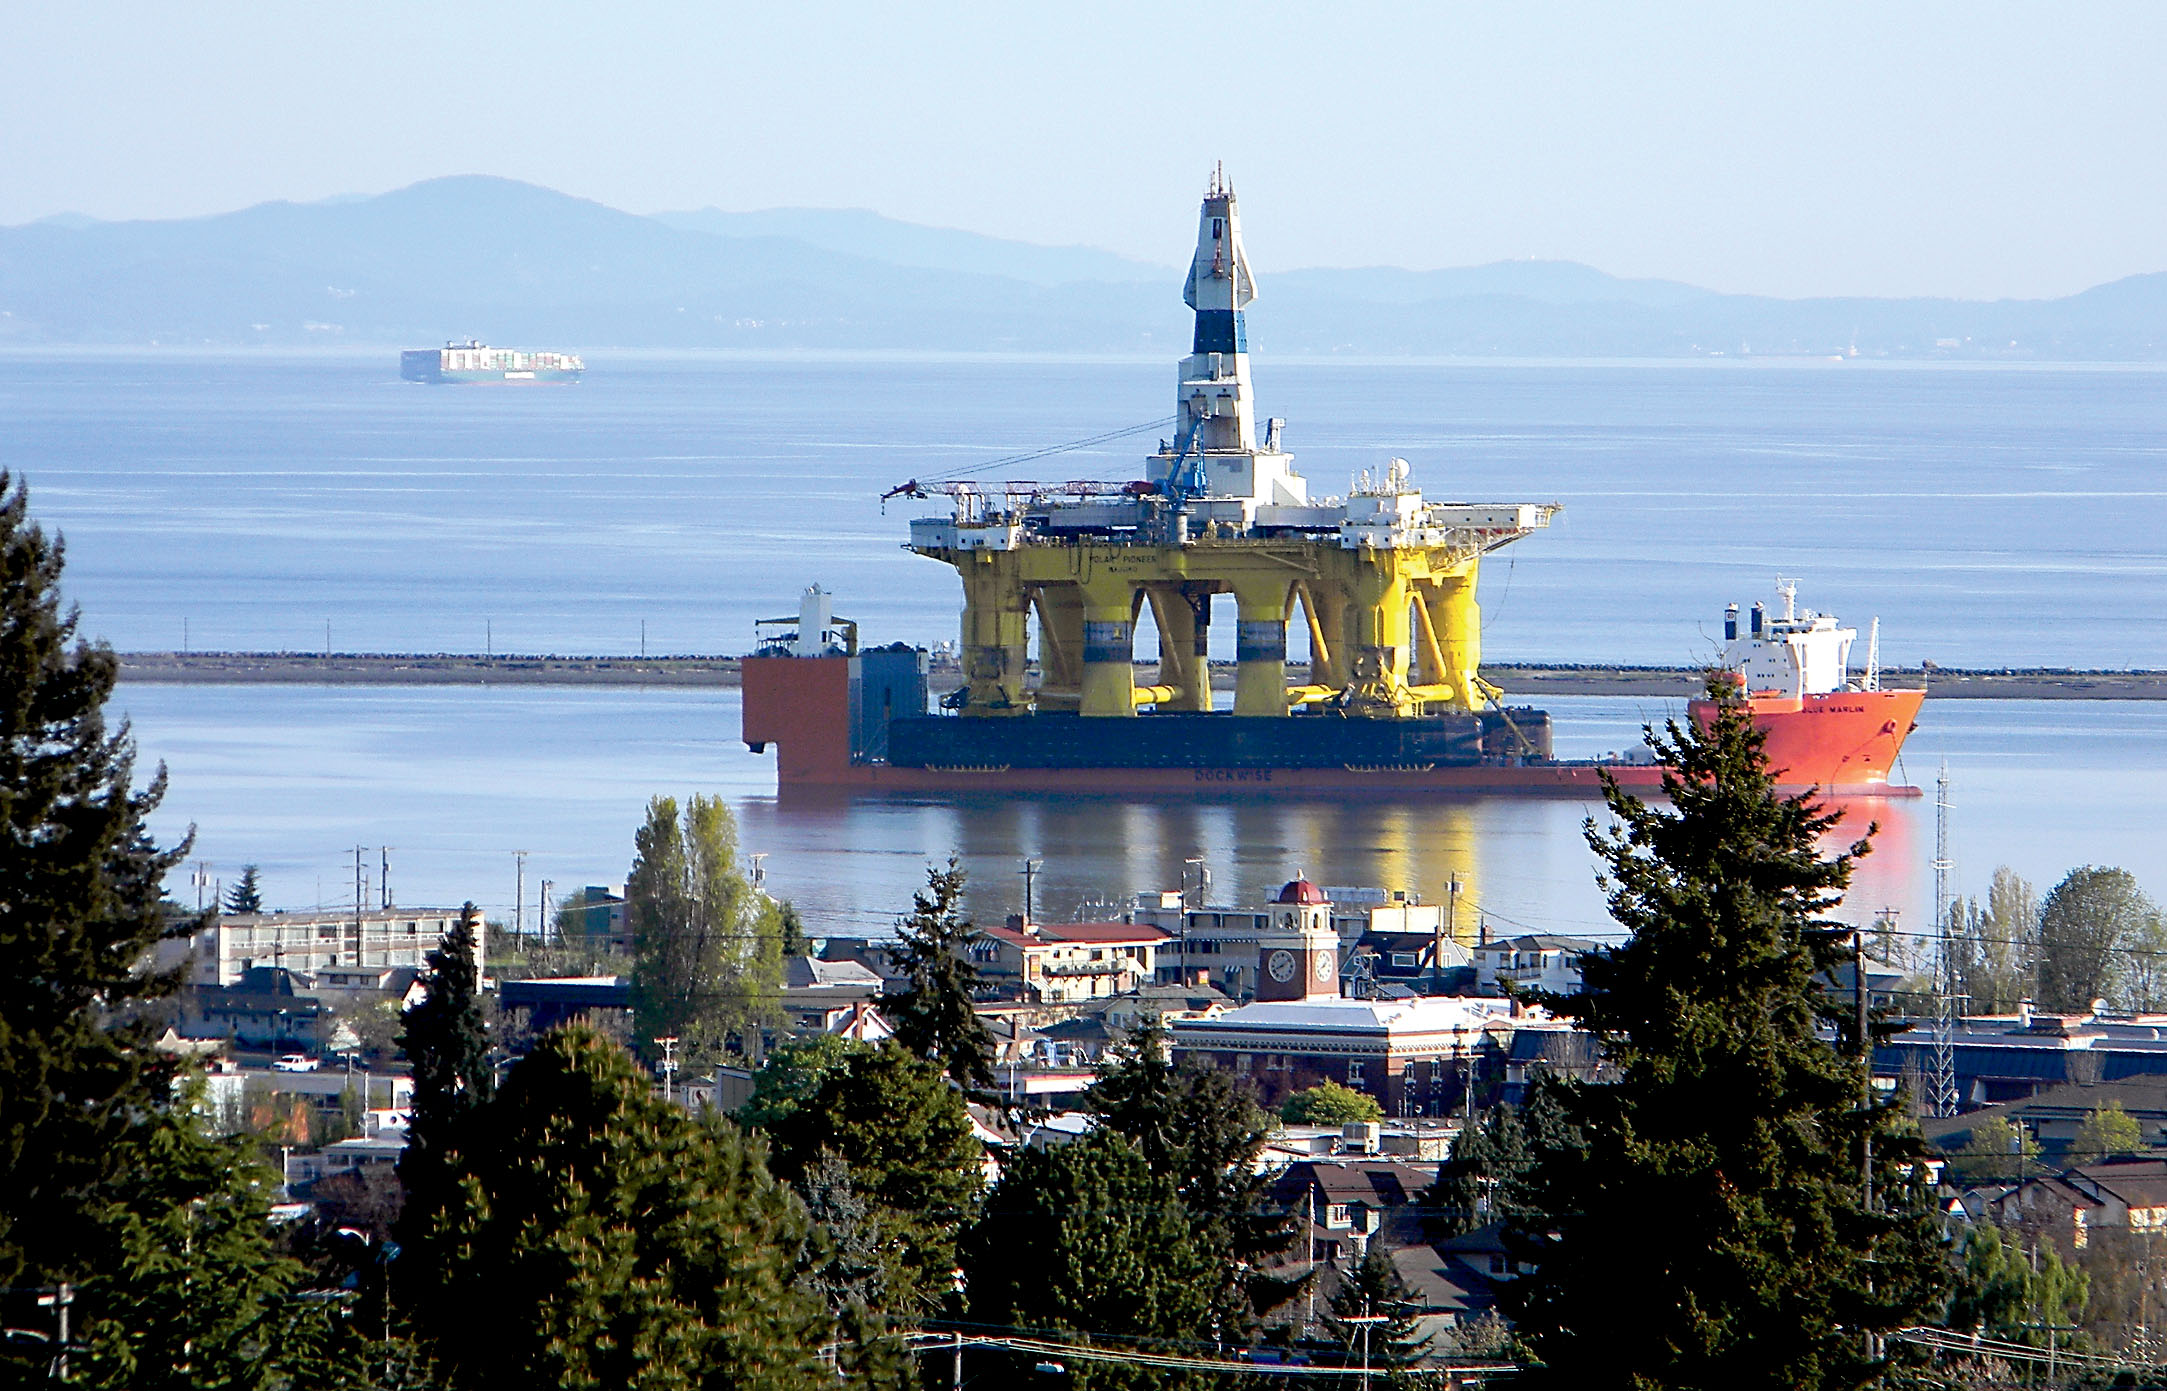 The offshore oil rig Polar Pioneer